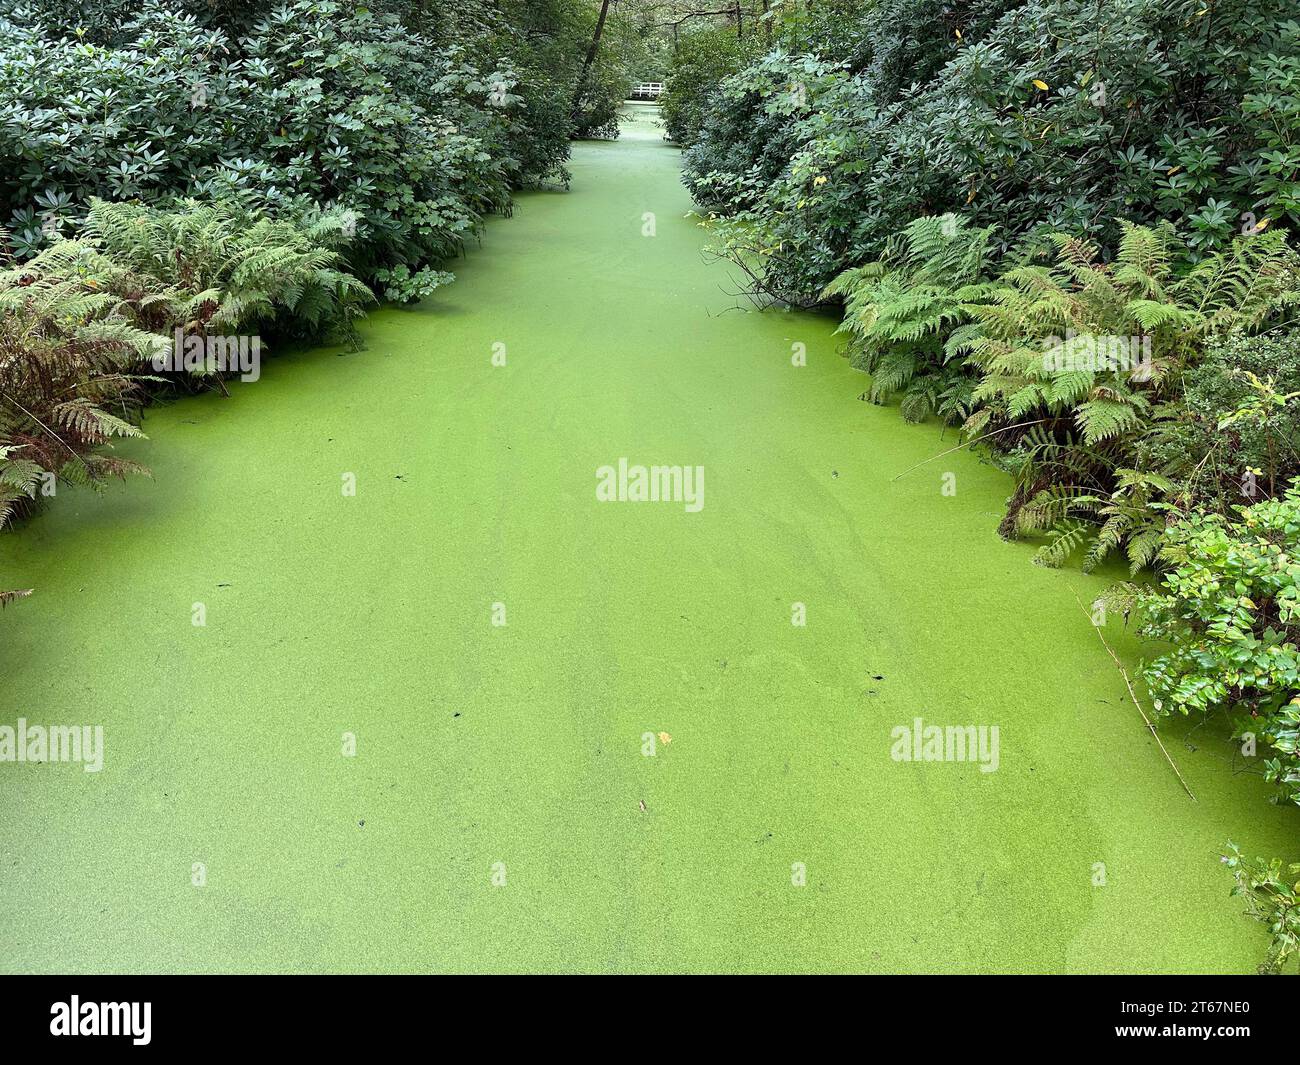 Green beautiful water channel among bushes in park Stock Photo